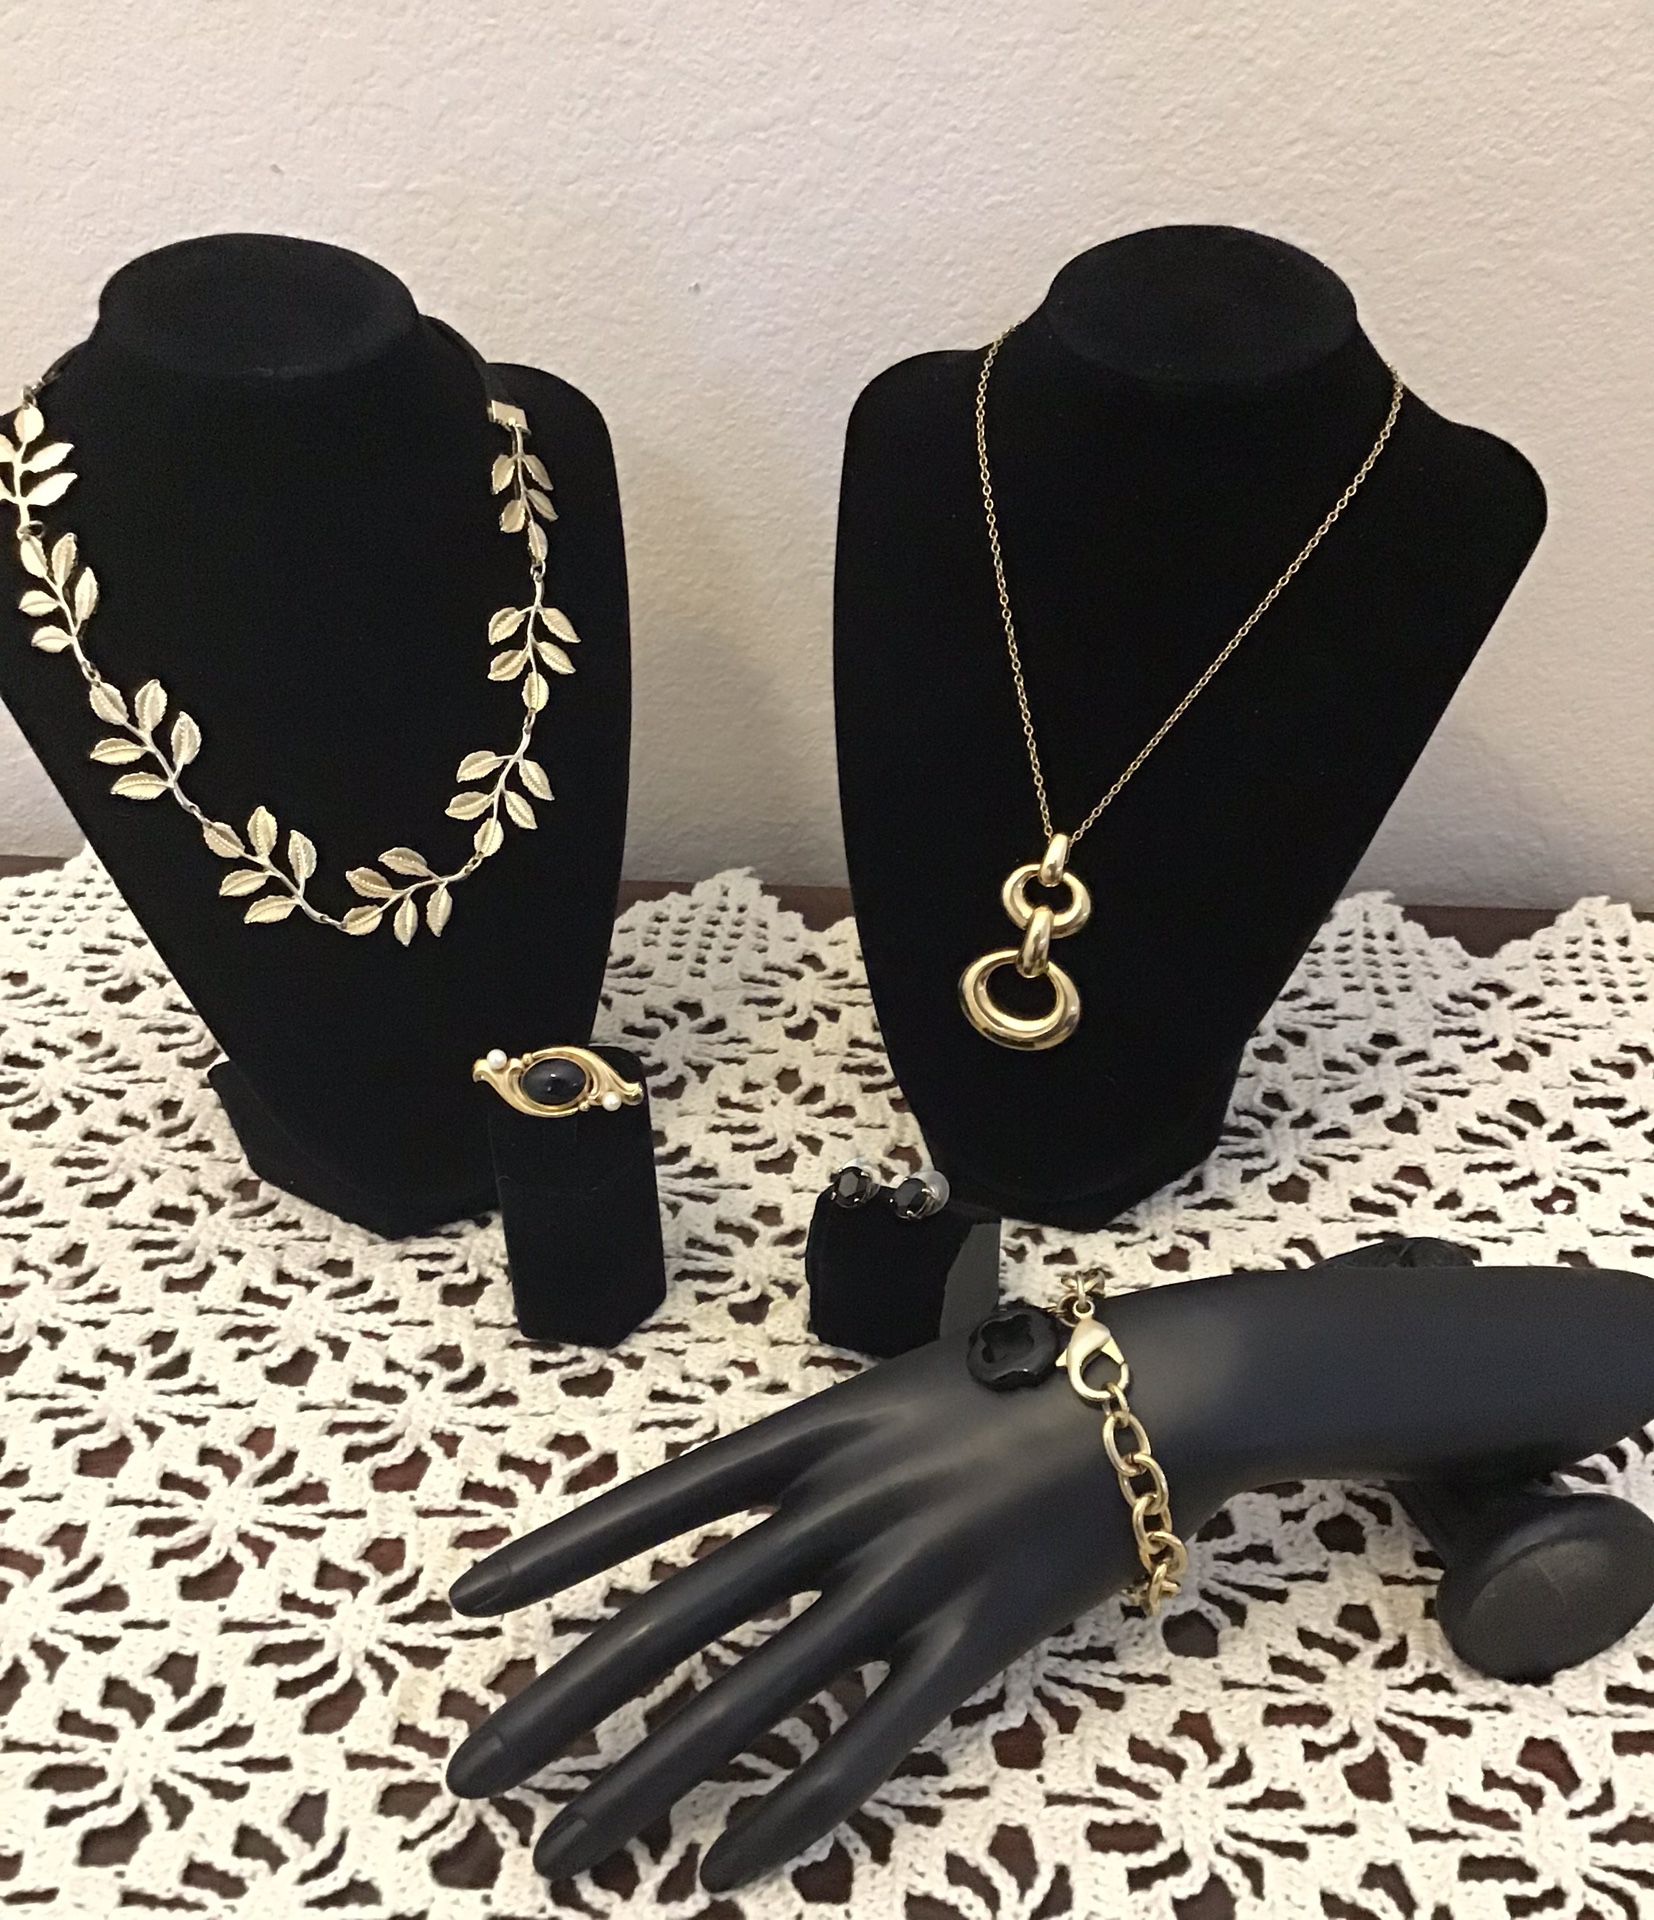 Jewelry Lot in Gold Tone.  1 Necklace, 1 Pair of Earrings, 1 Chain Bracelet, 1 Gold/Black Pin & 1 Romantic Vintage Branch + Leaves Hair Band/headband